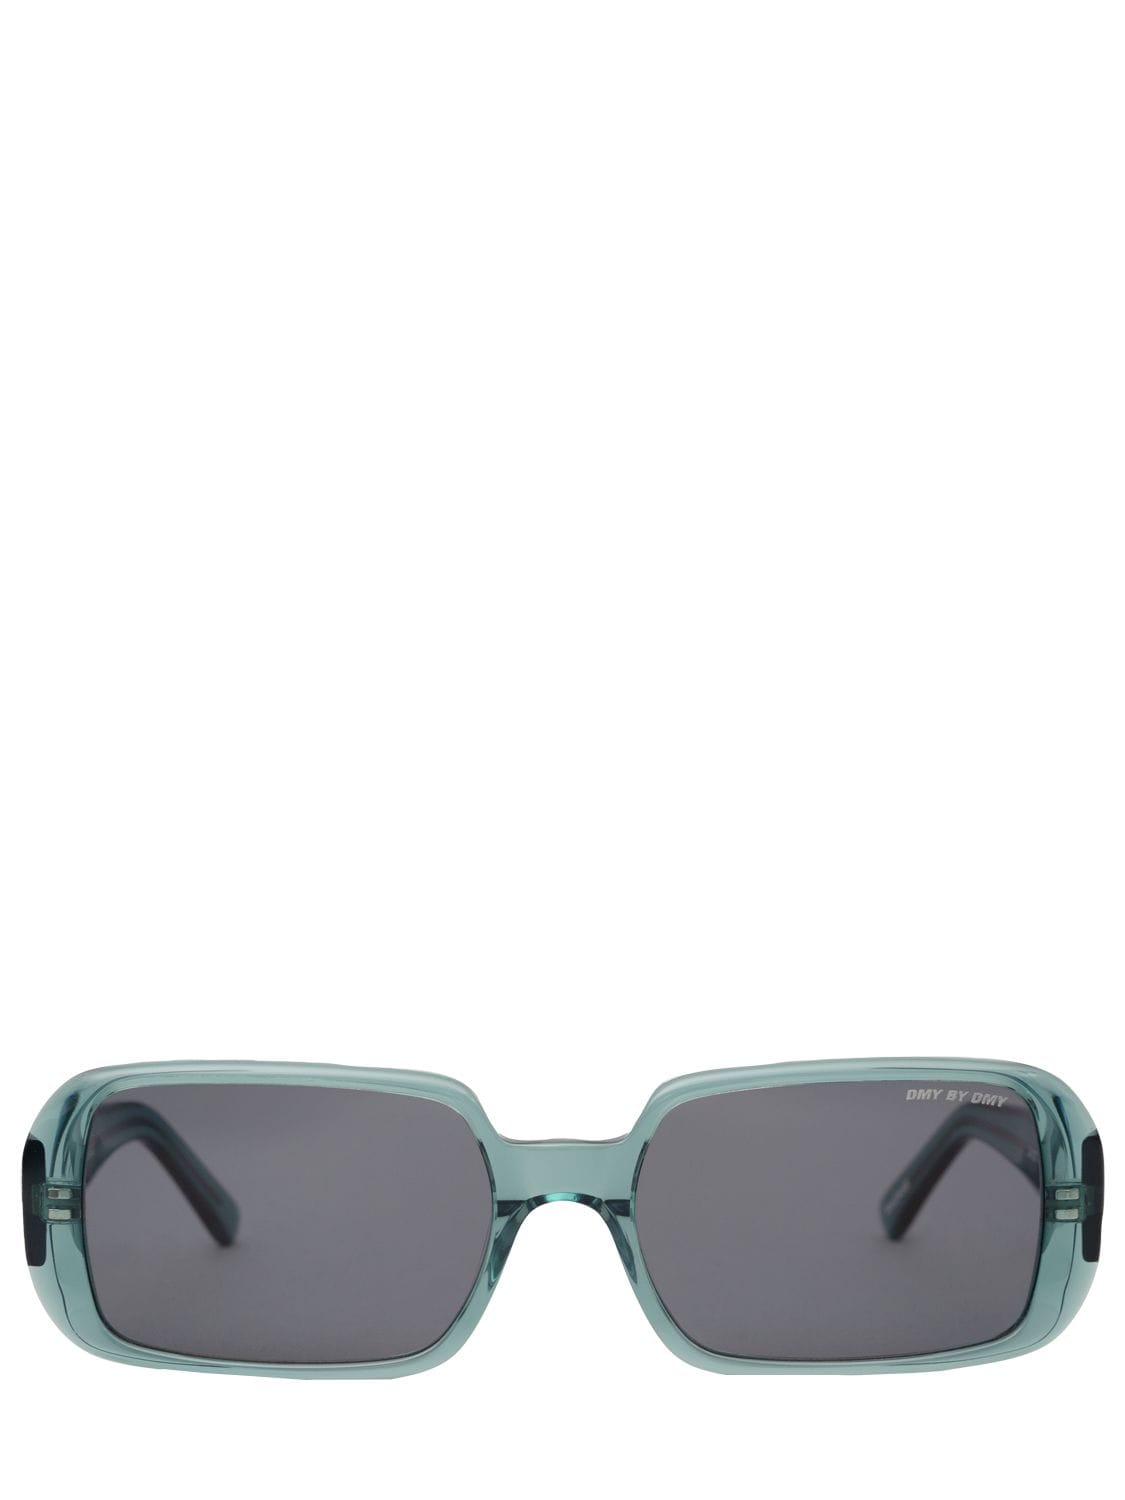 DMY BY DMY Luca Squared Acetate Sunglasses